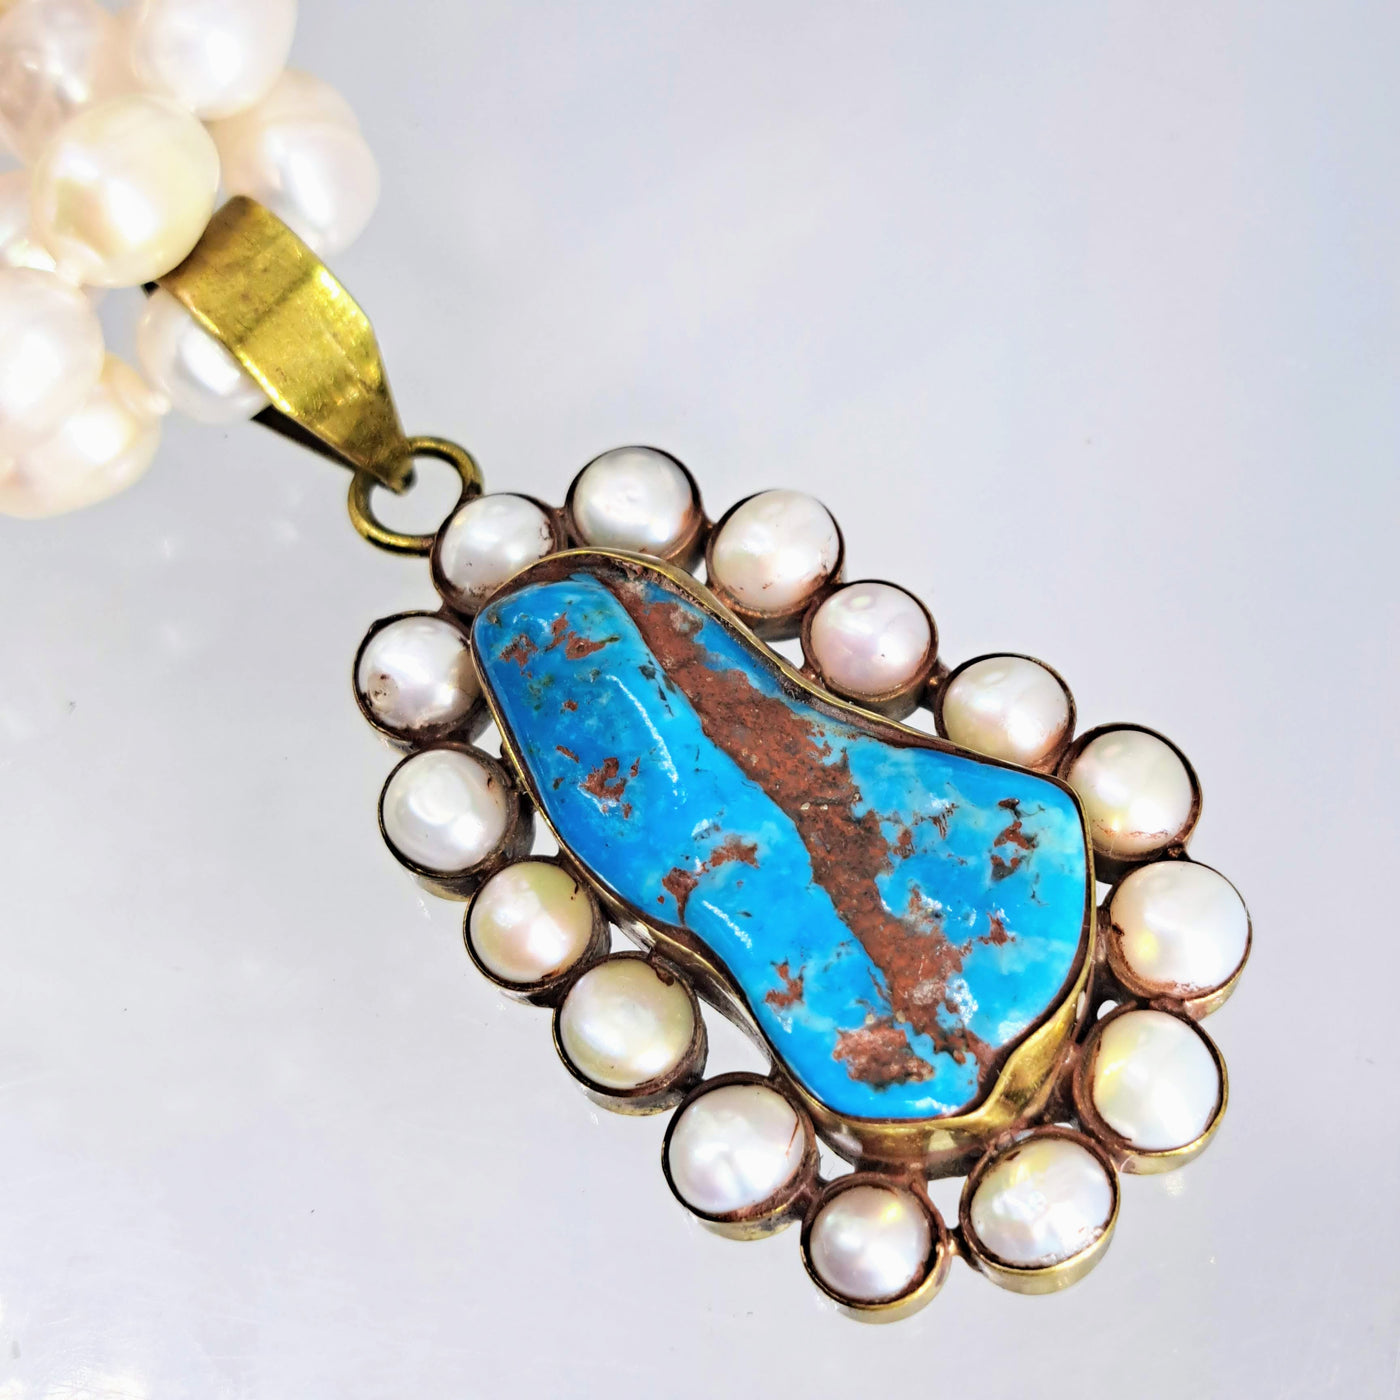 "All-Around Magical!" Pendant Necklace - Turquoise, Pearls, Brass, Sterling